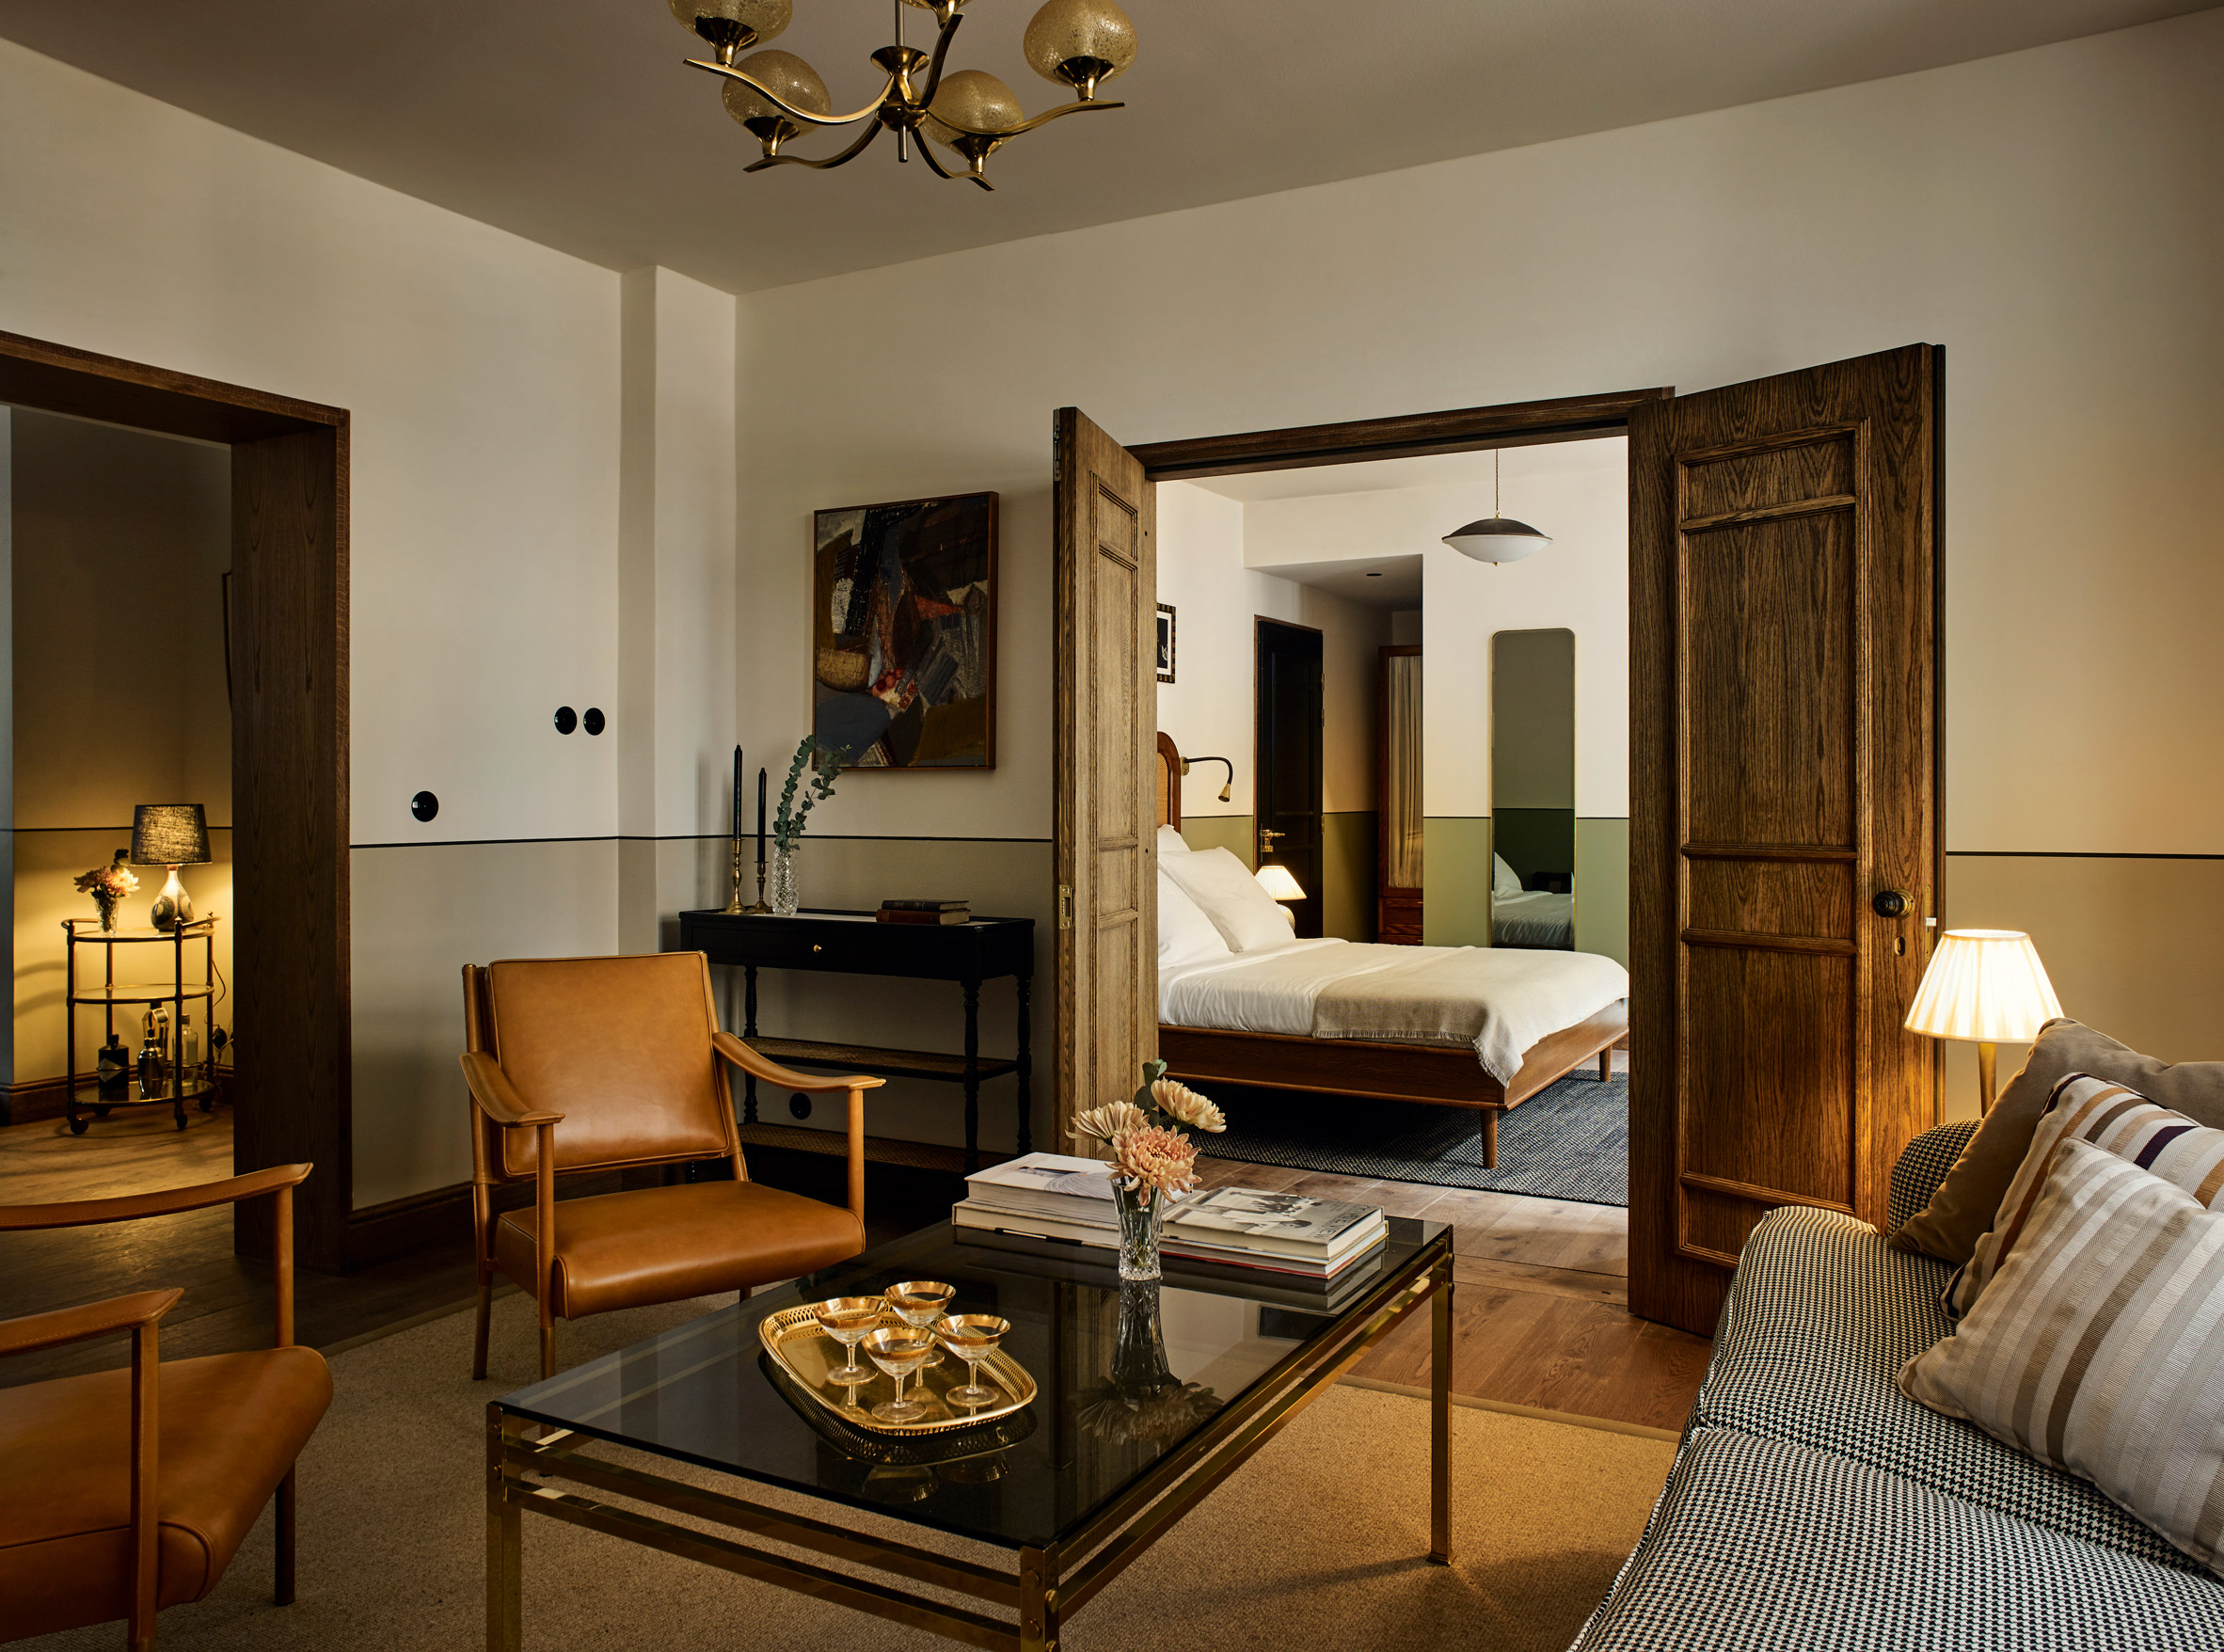 Hotel Sanders by Lind + Almond revives "old-world, glamorous side of travel"